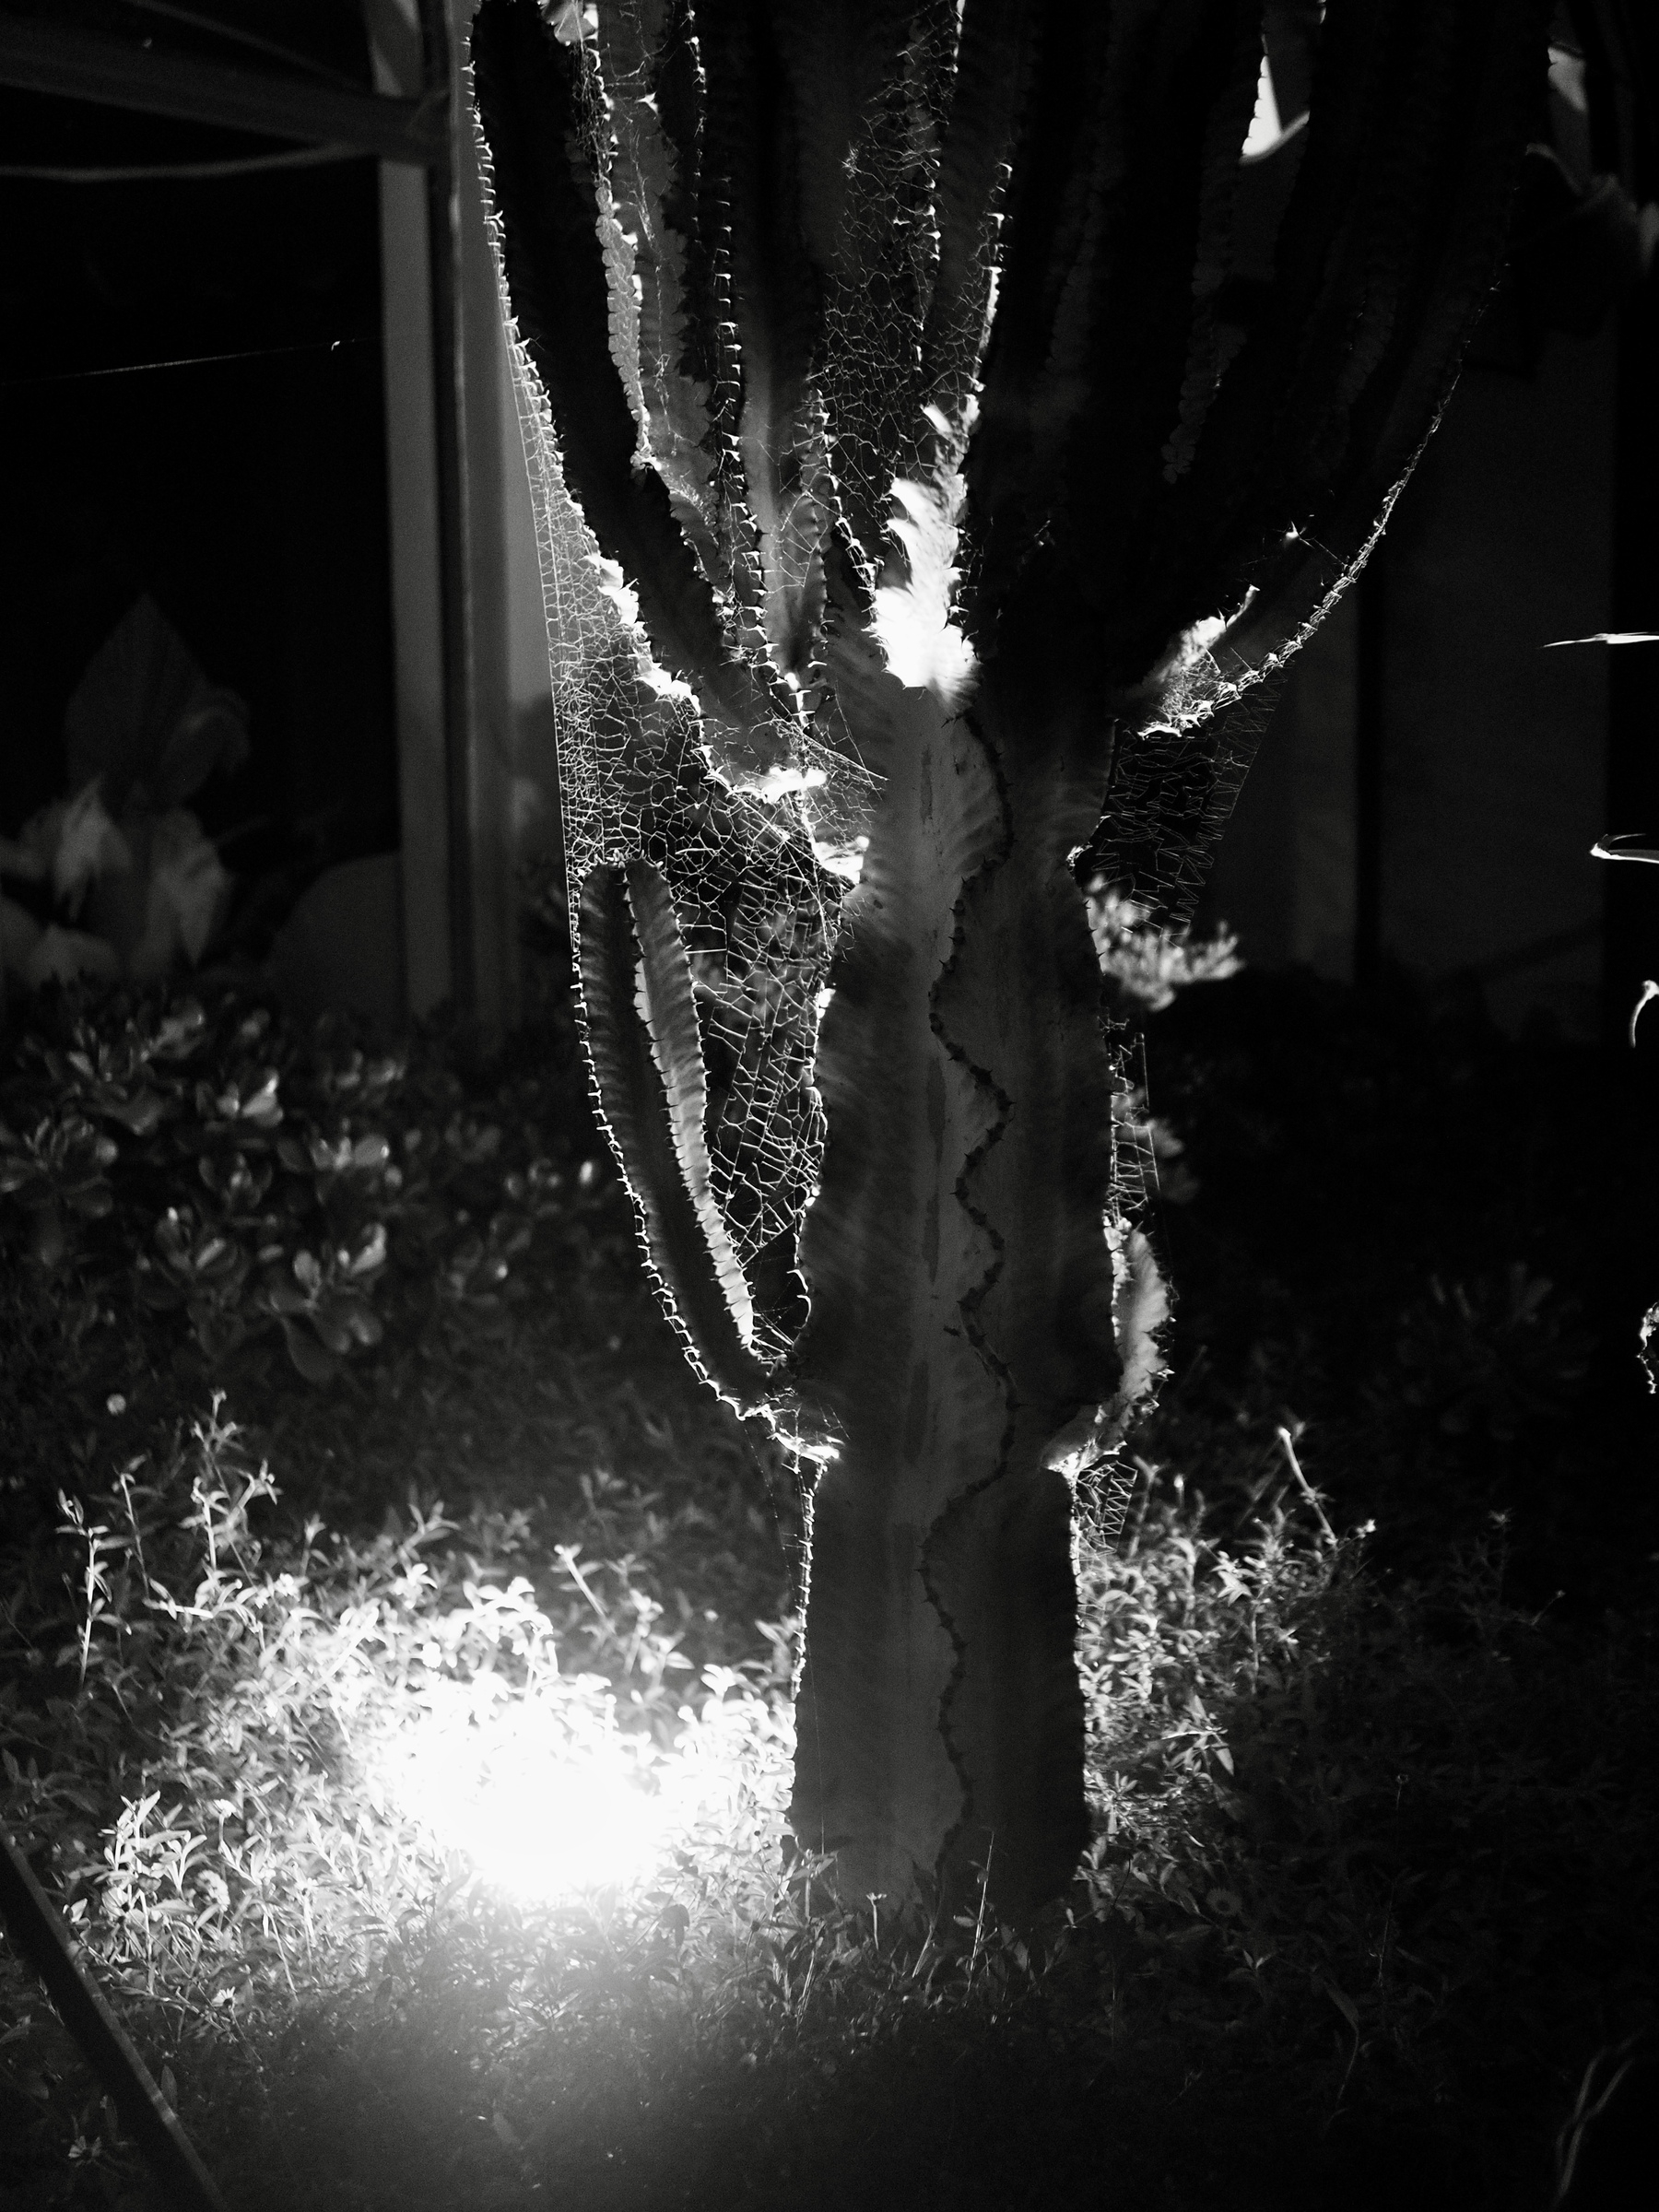 A close-up of a cactus and spider web being lit from underneath